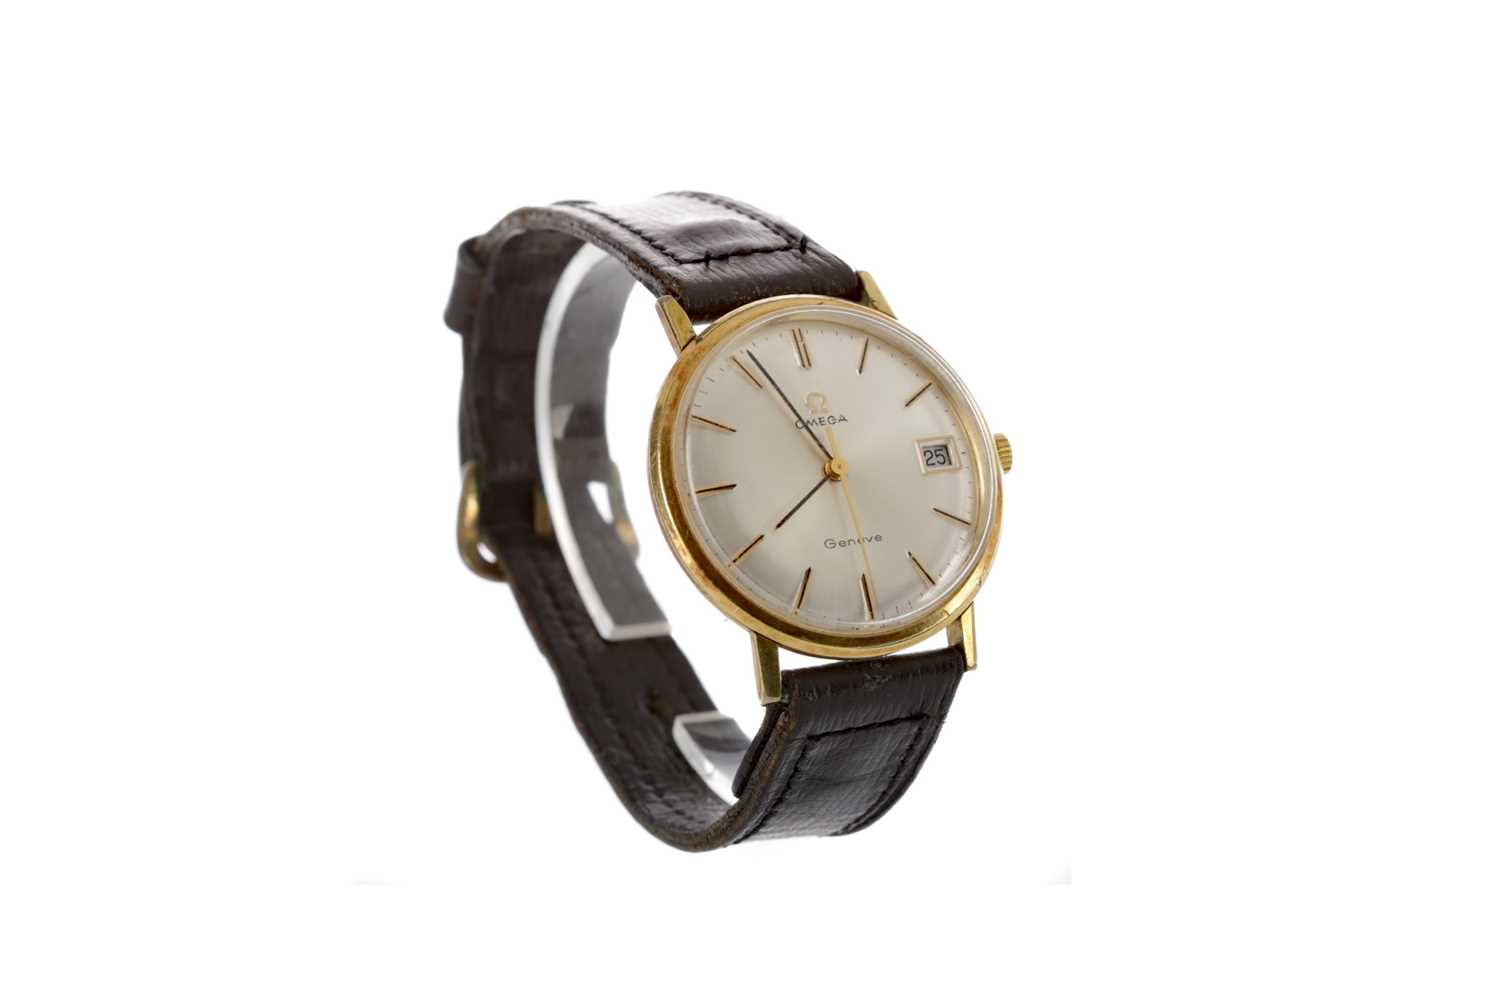 Lot 931 - A GENTLEMAN'S OMEGA GENEVE GOLD PLATED MANUAL WIND WRIST WATCH